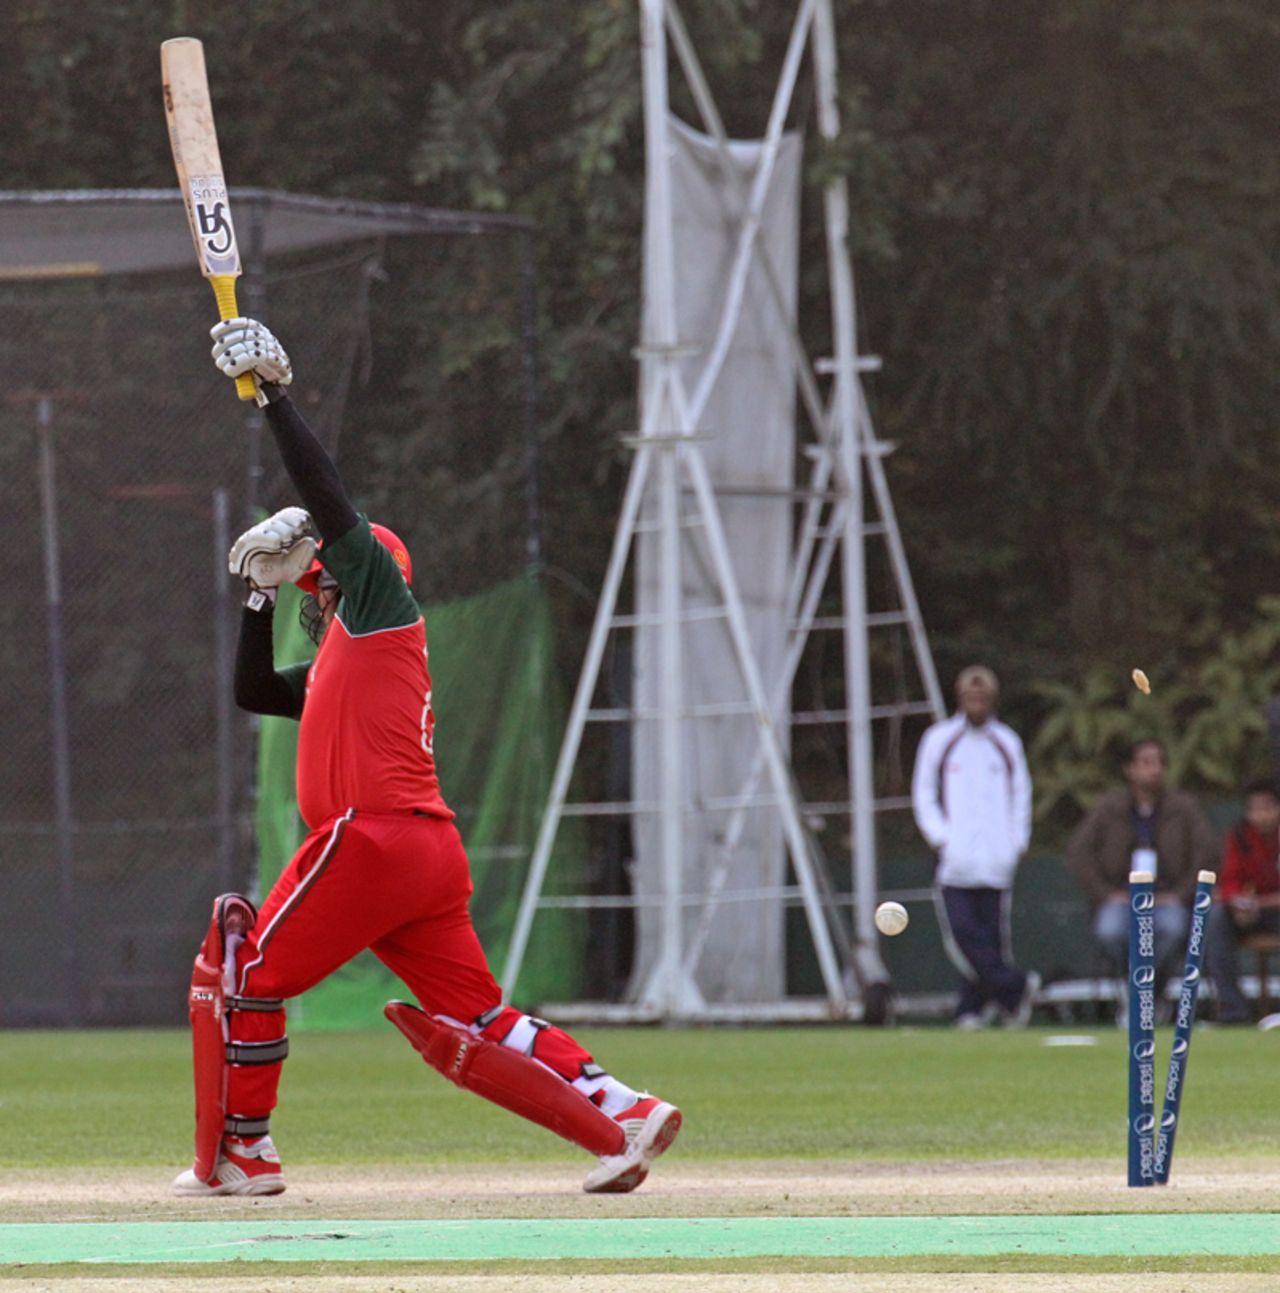 Oman's Awal Khan is bowled against Hong Kong during the ICC WCL Division 3 match played at Kowloon Cricket Club on 23rd January 2011